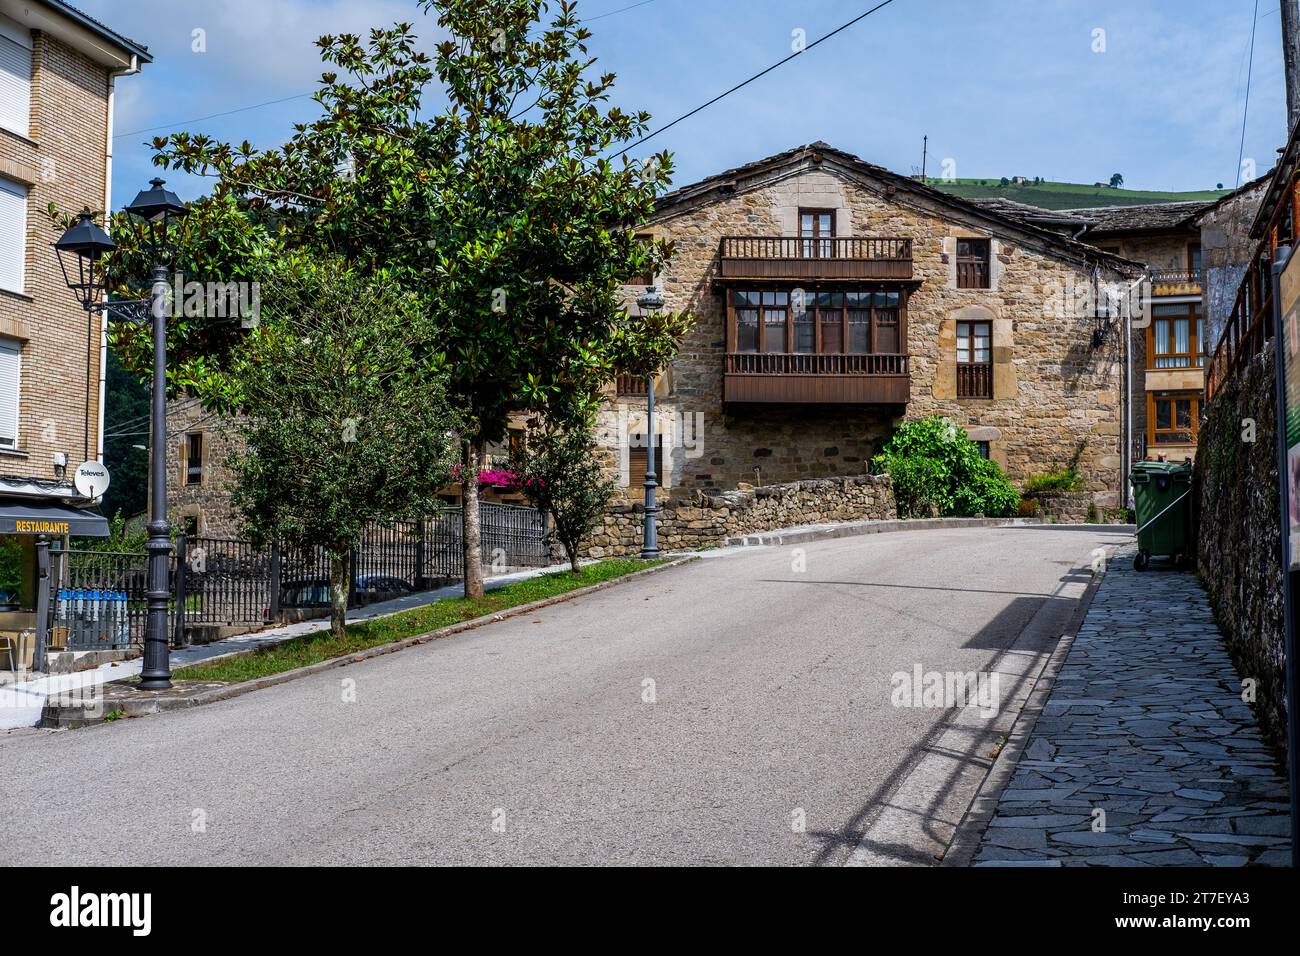 Serenity in Pas Valley: Capturing Timeless Beauty of a Rustic Hamlet and Vintage Homestead in Cantabria, Spain' Stock Photo